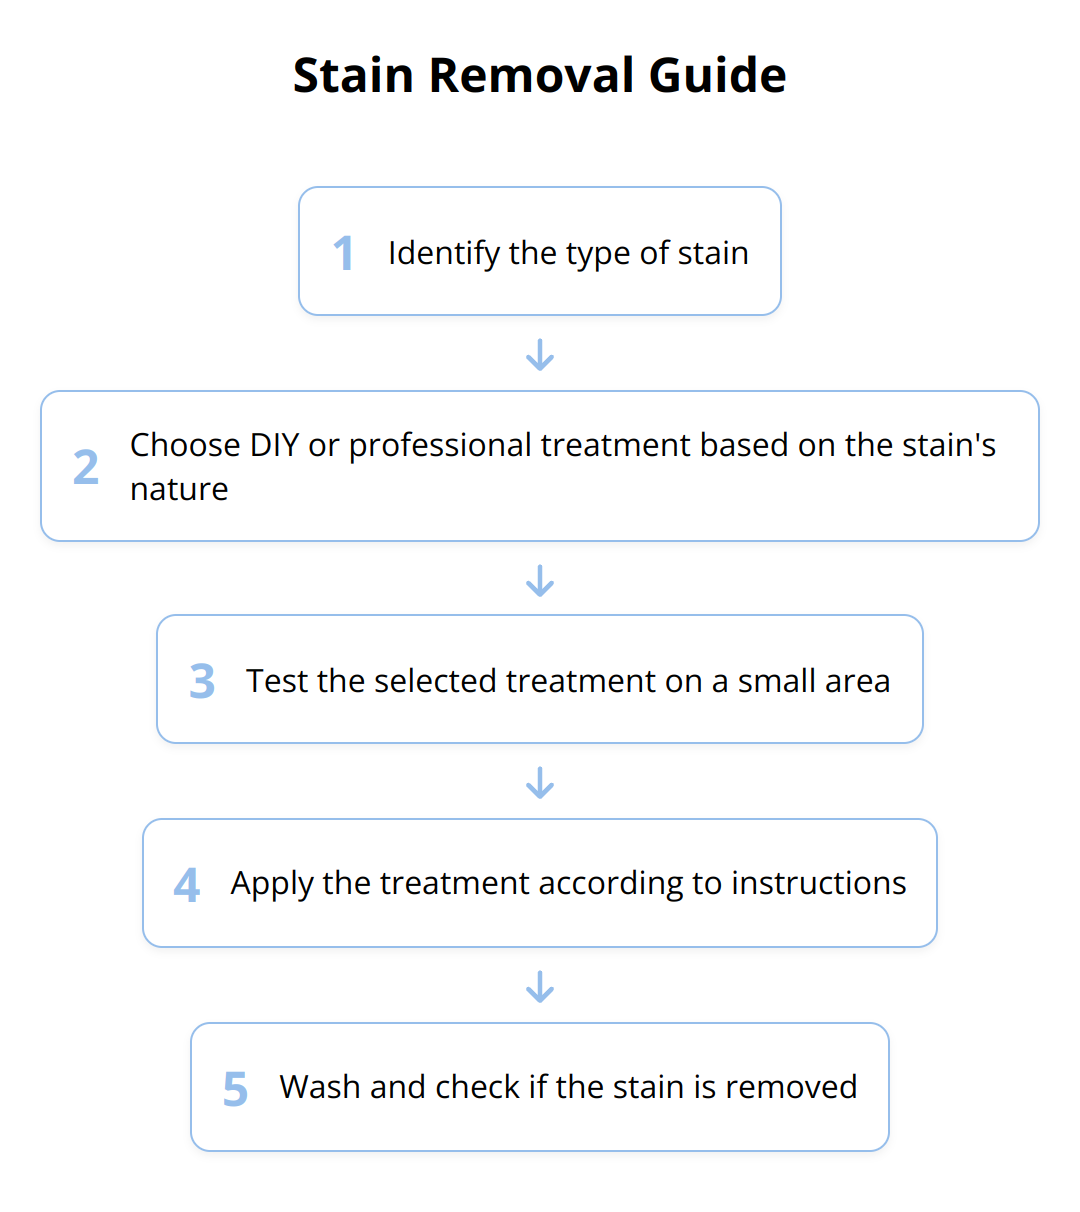 Flow Chart - Stain Removal Guide